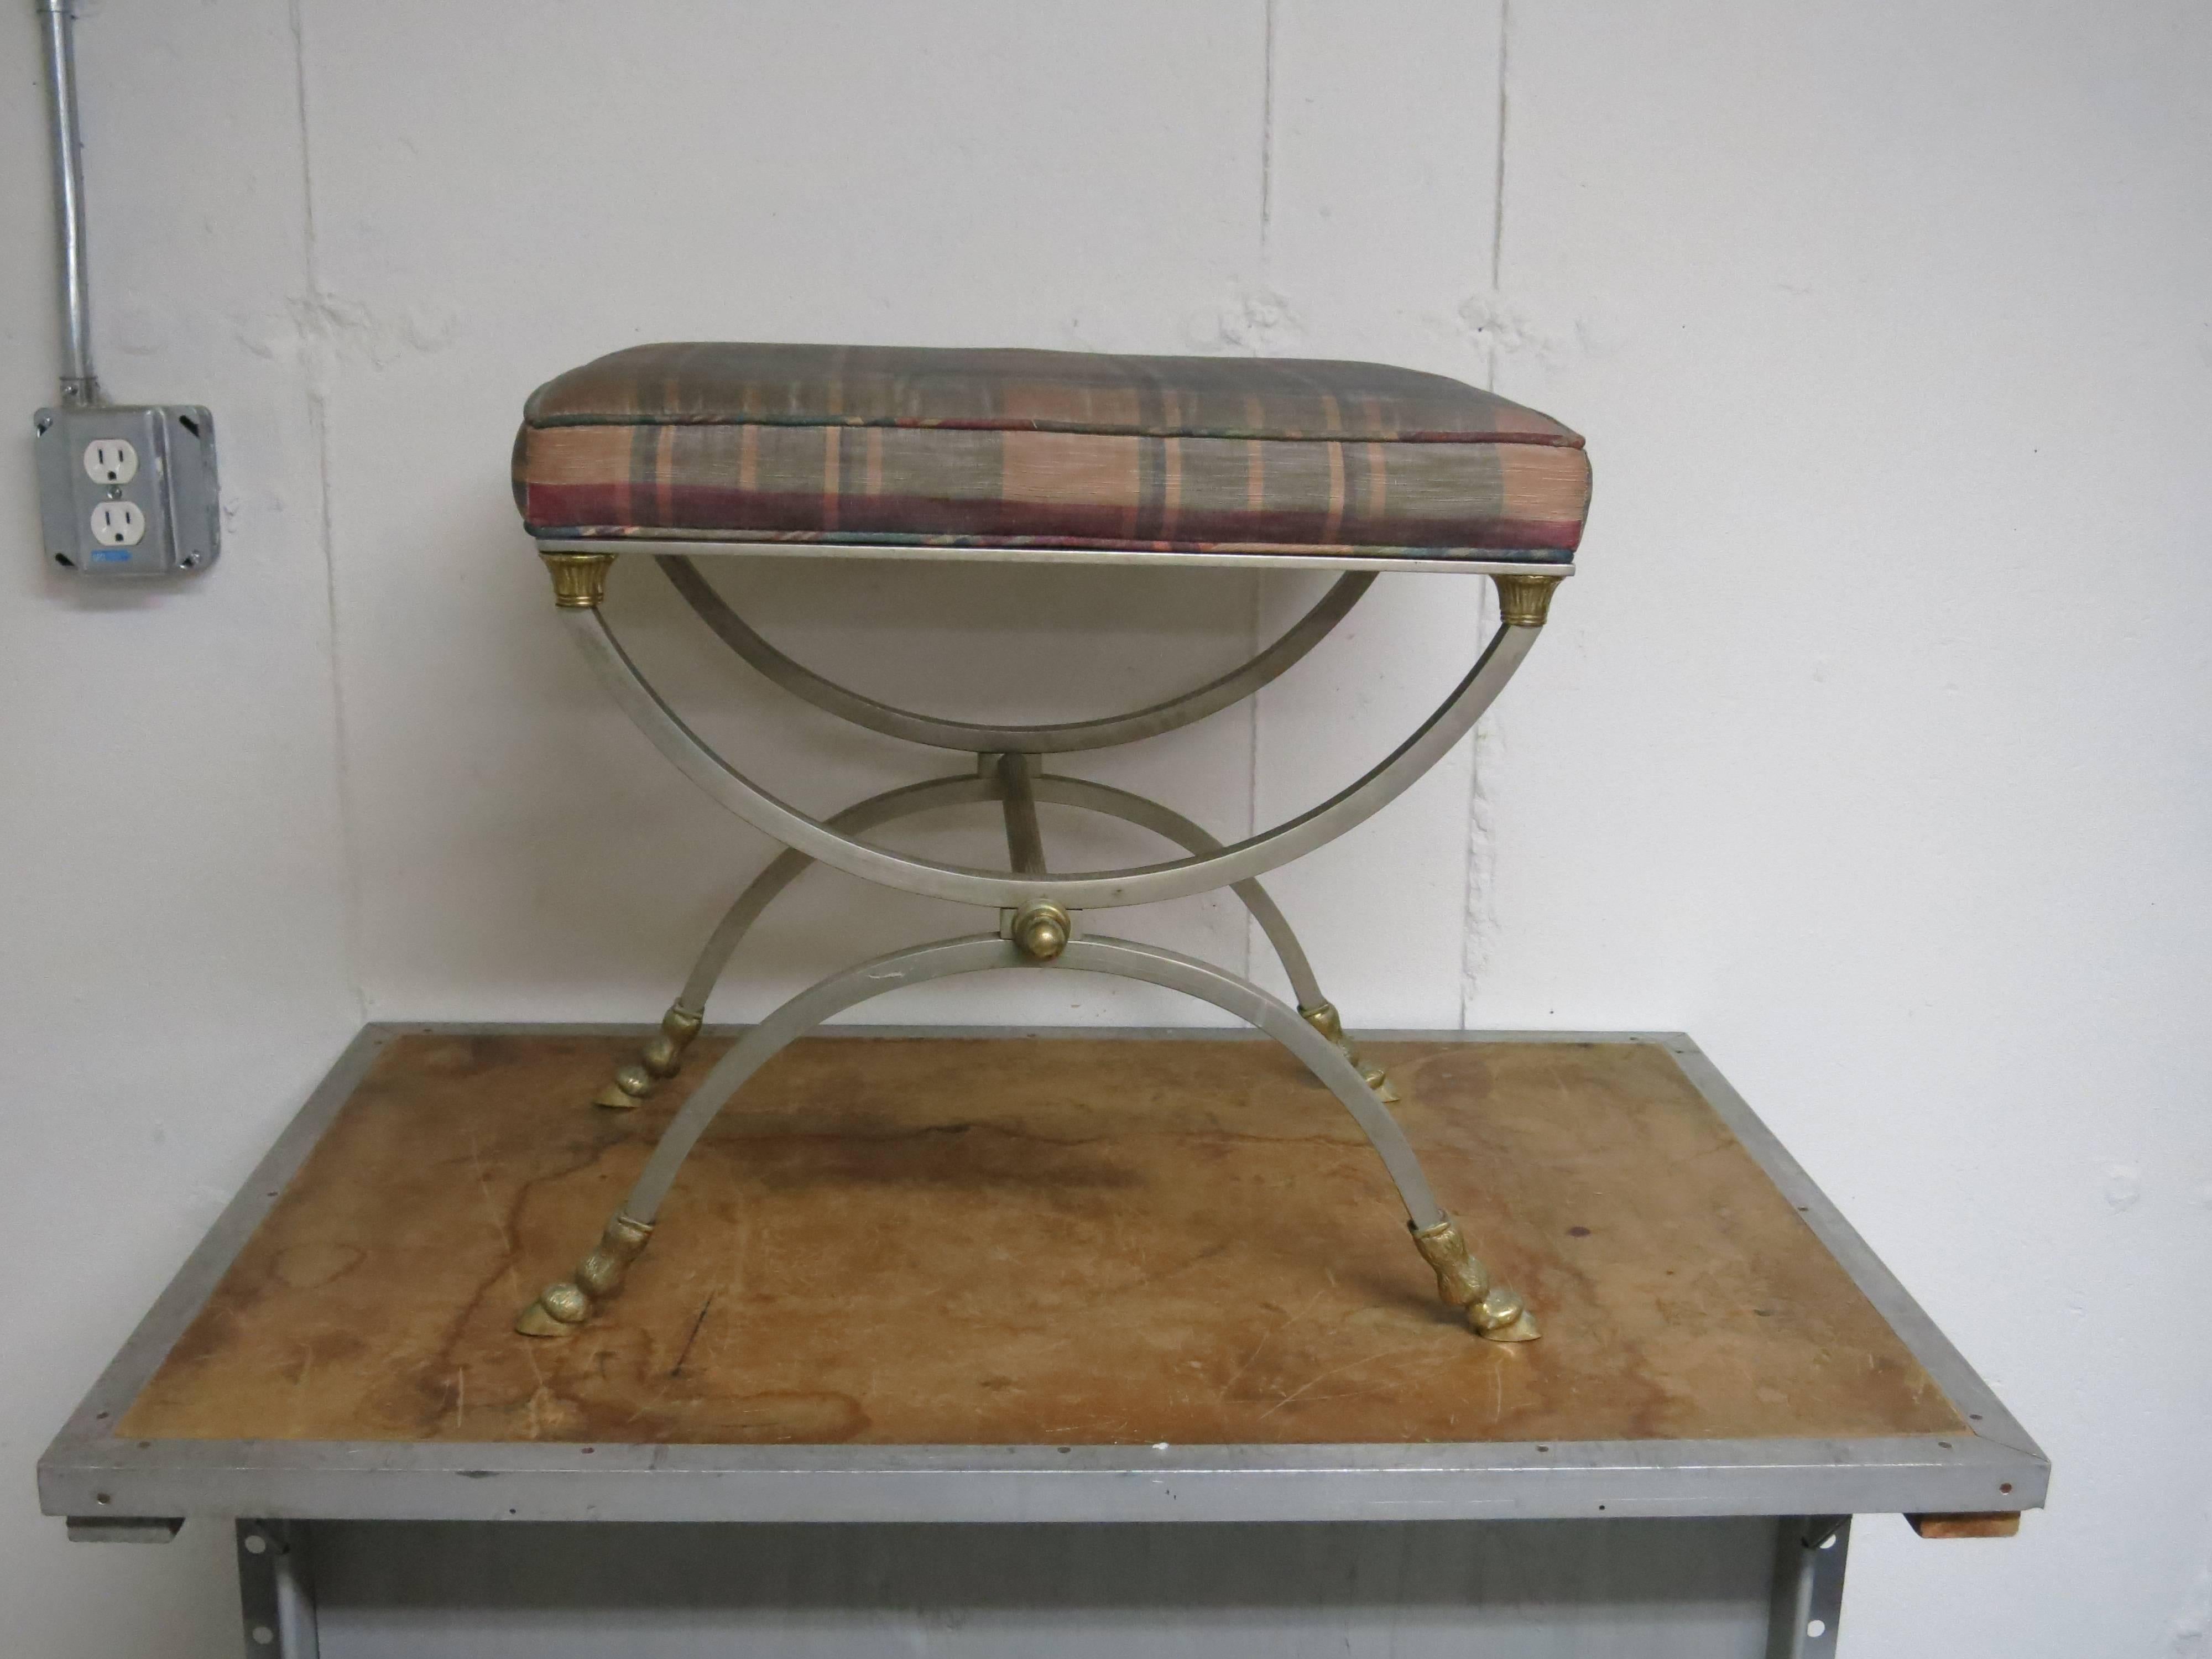 Vintage brushed chrome and brass stool made in Italy. It is 19